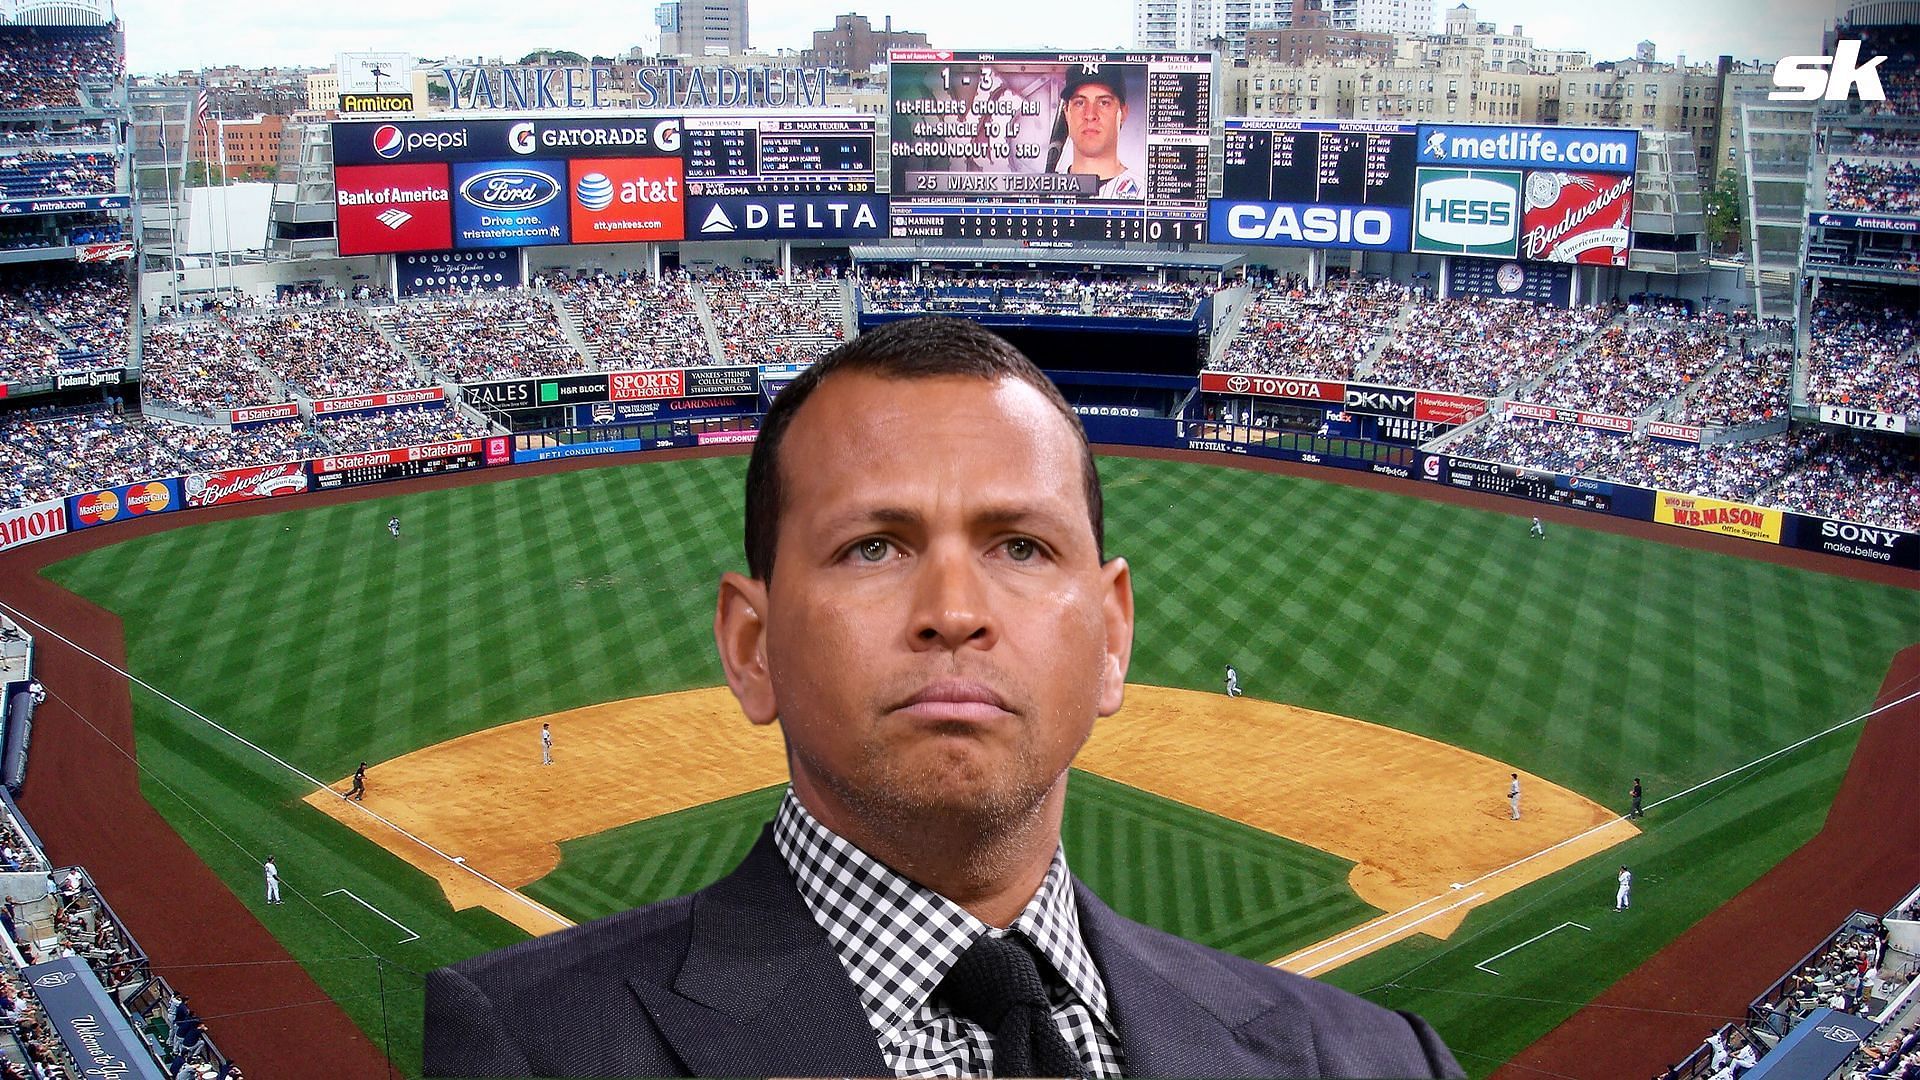 Alex Rodriguez with the Yankees Shortstop / Third baseman Seattle